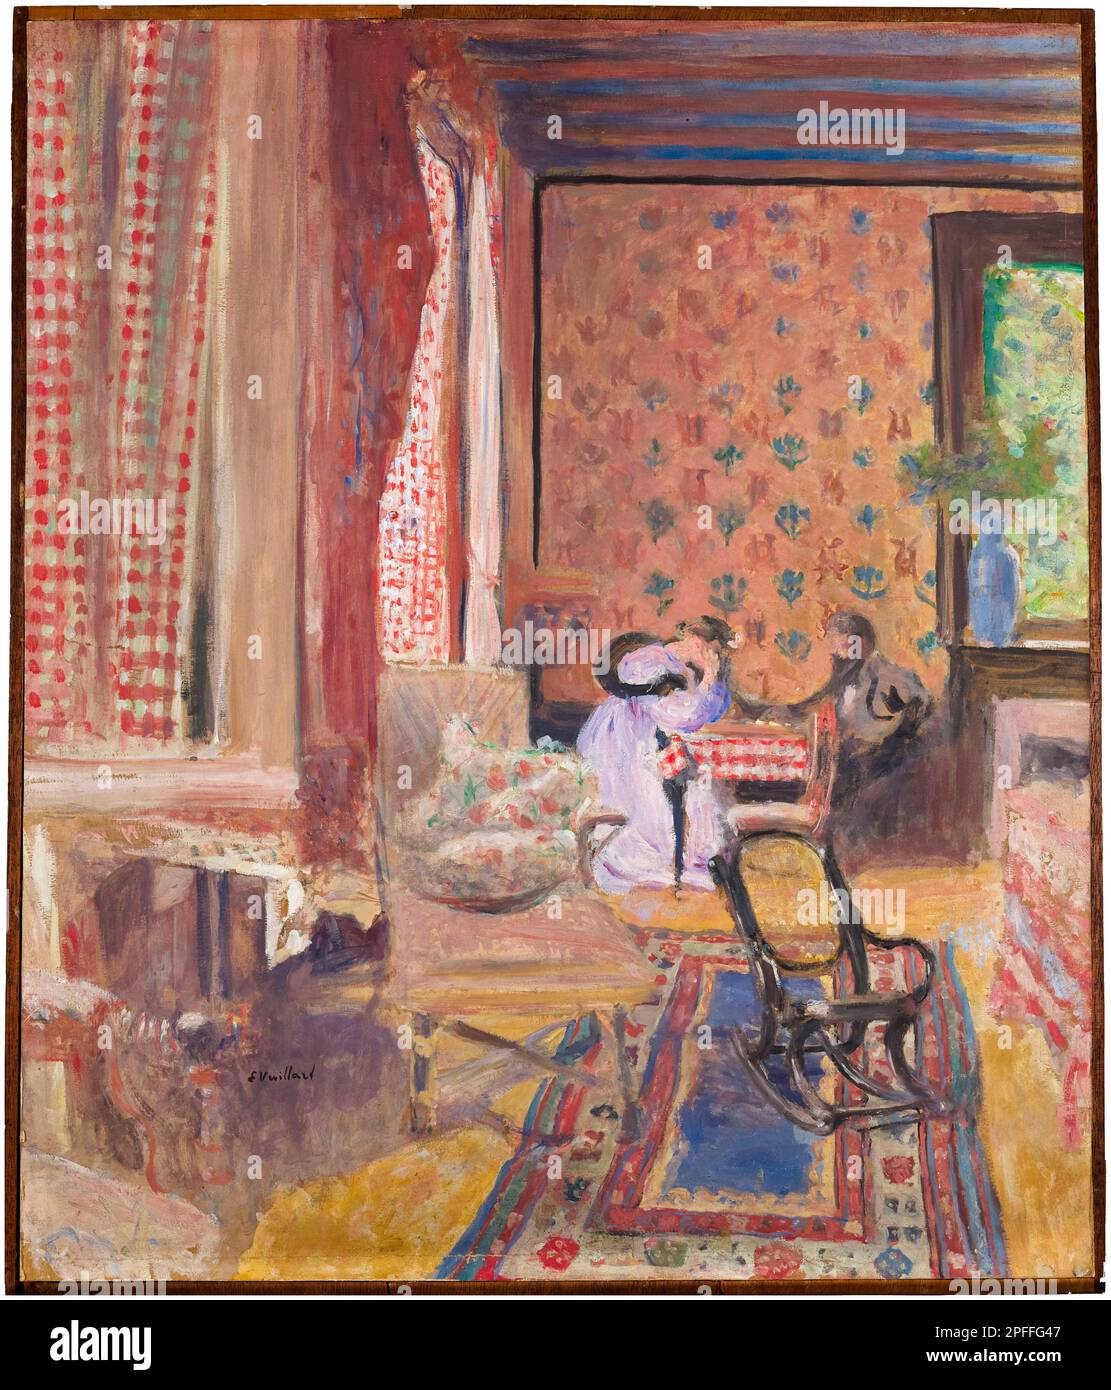 Édouard Vuillard, At the Board Game, (La partie de dames), painting in oil on wood, 1902 Stock Photo